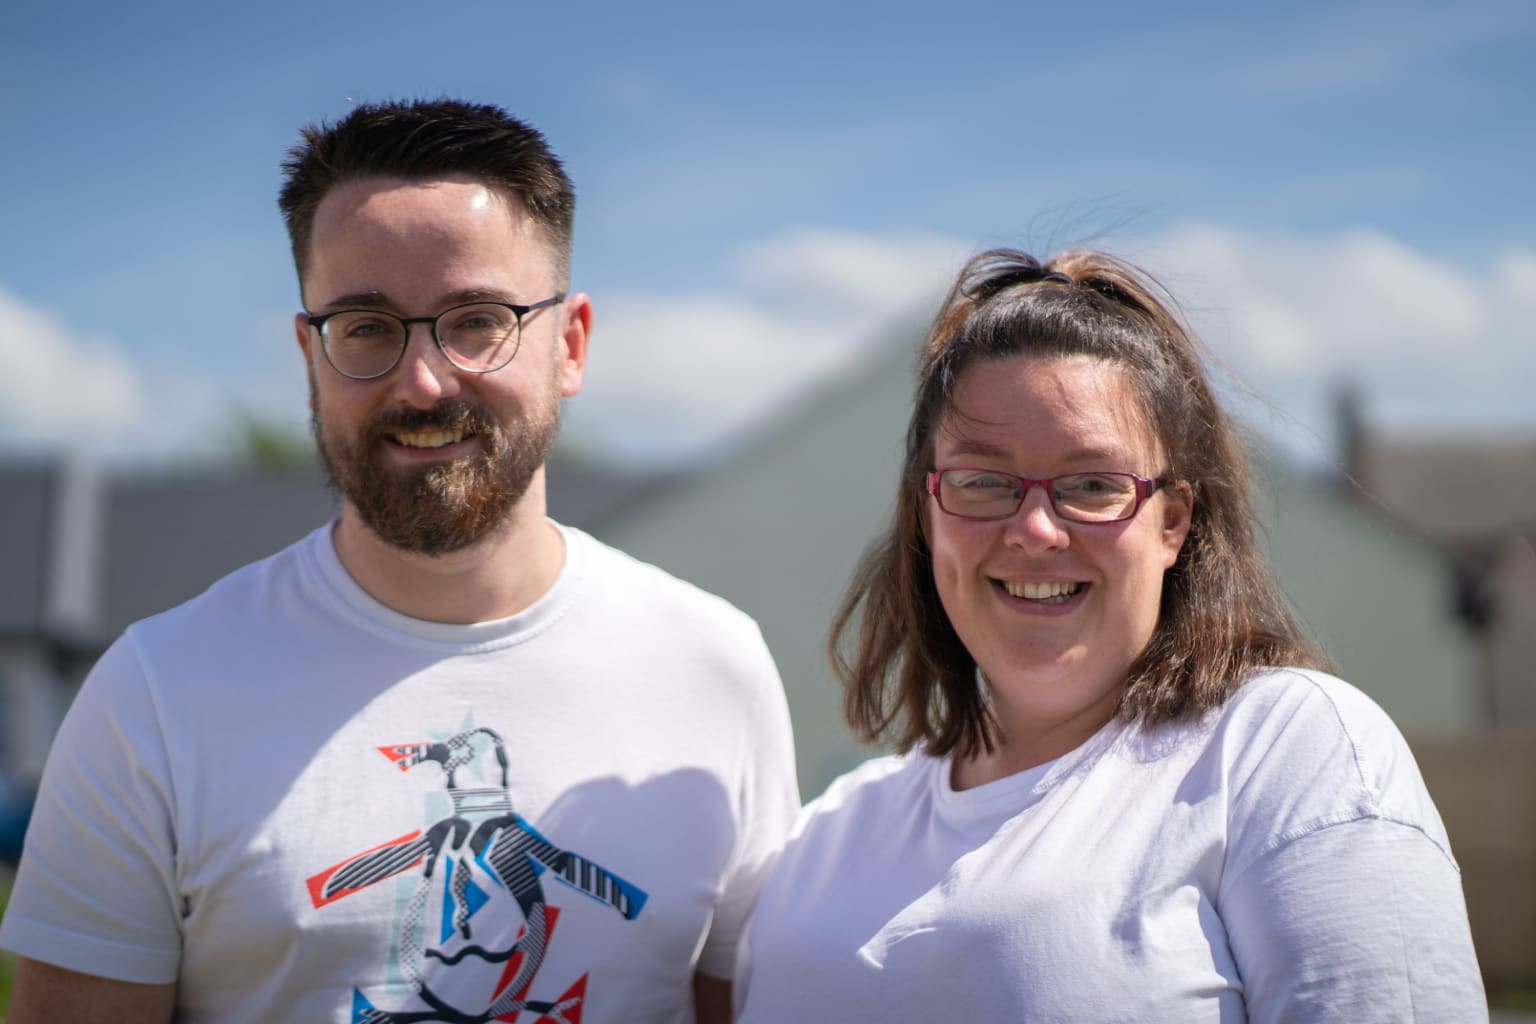 Stuart and Deborah stand smiling at the camera in white T-shirts. There is a beautiful blue sky behind them.